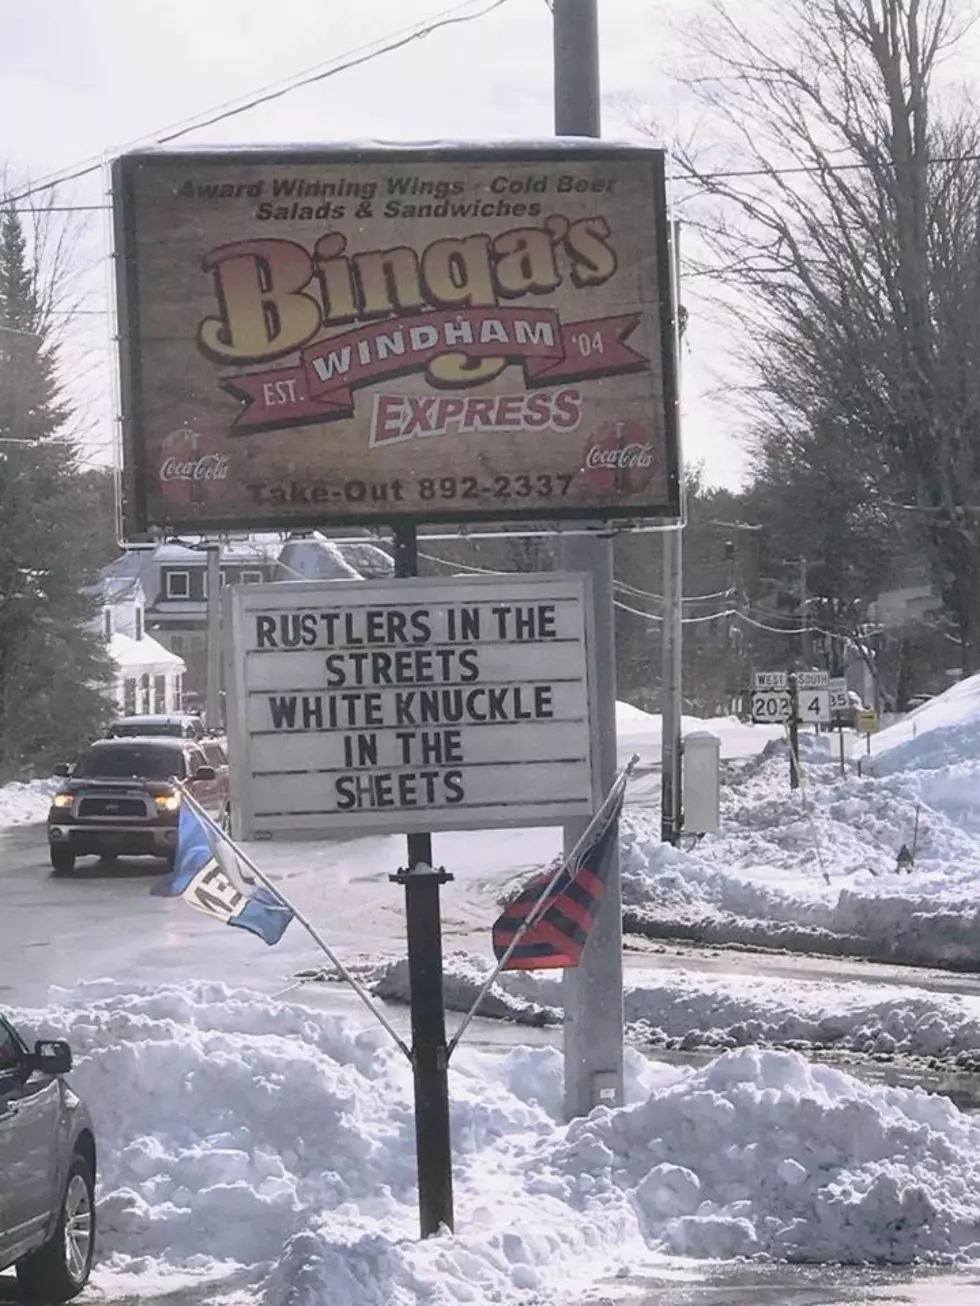 Binga’s Windham Is Still The King When It Comes To Signs [PHOTOS]